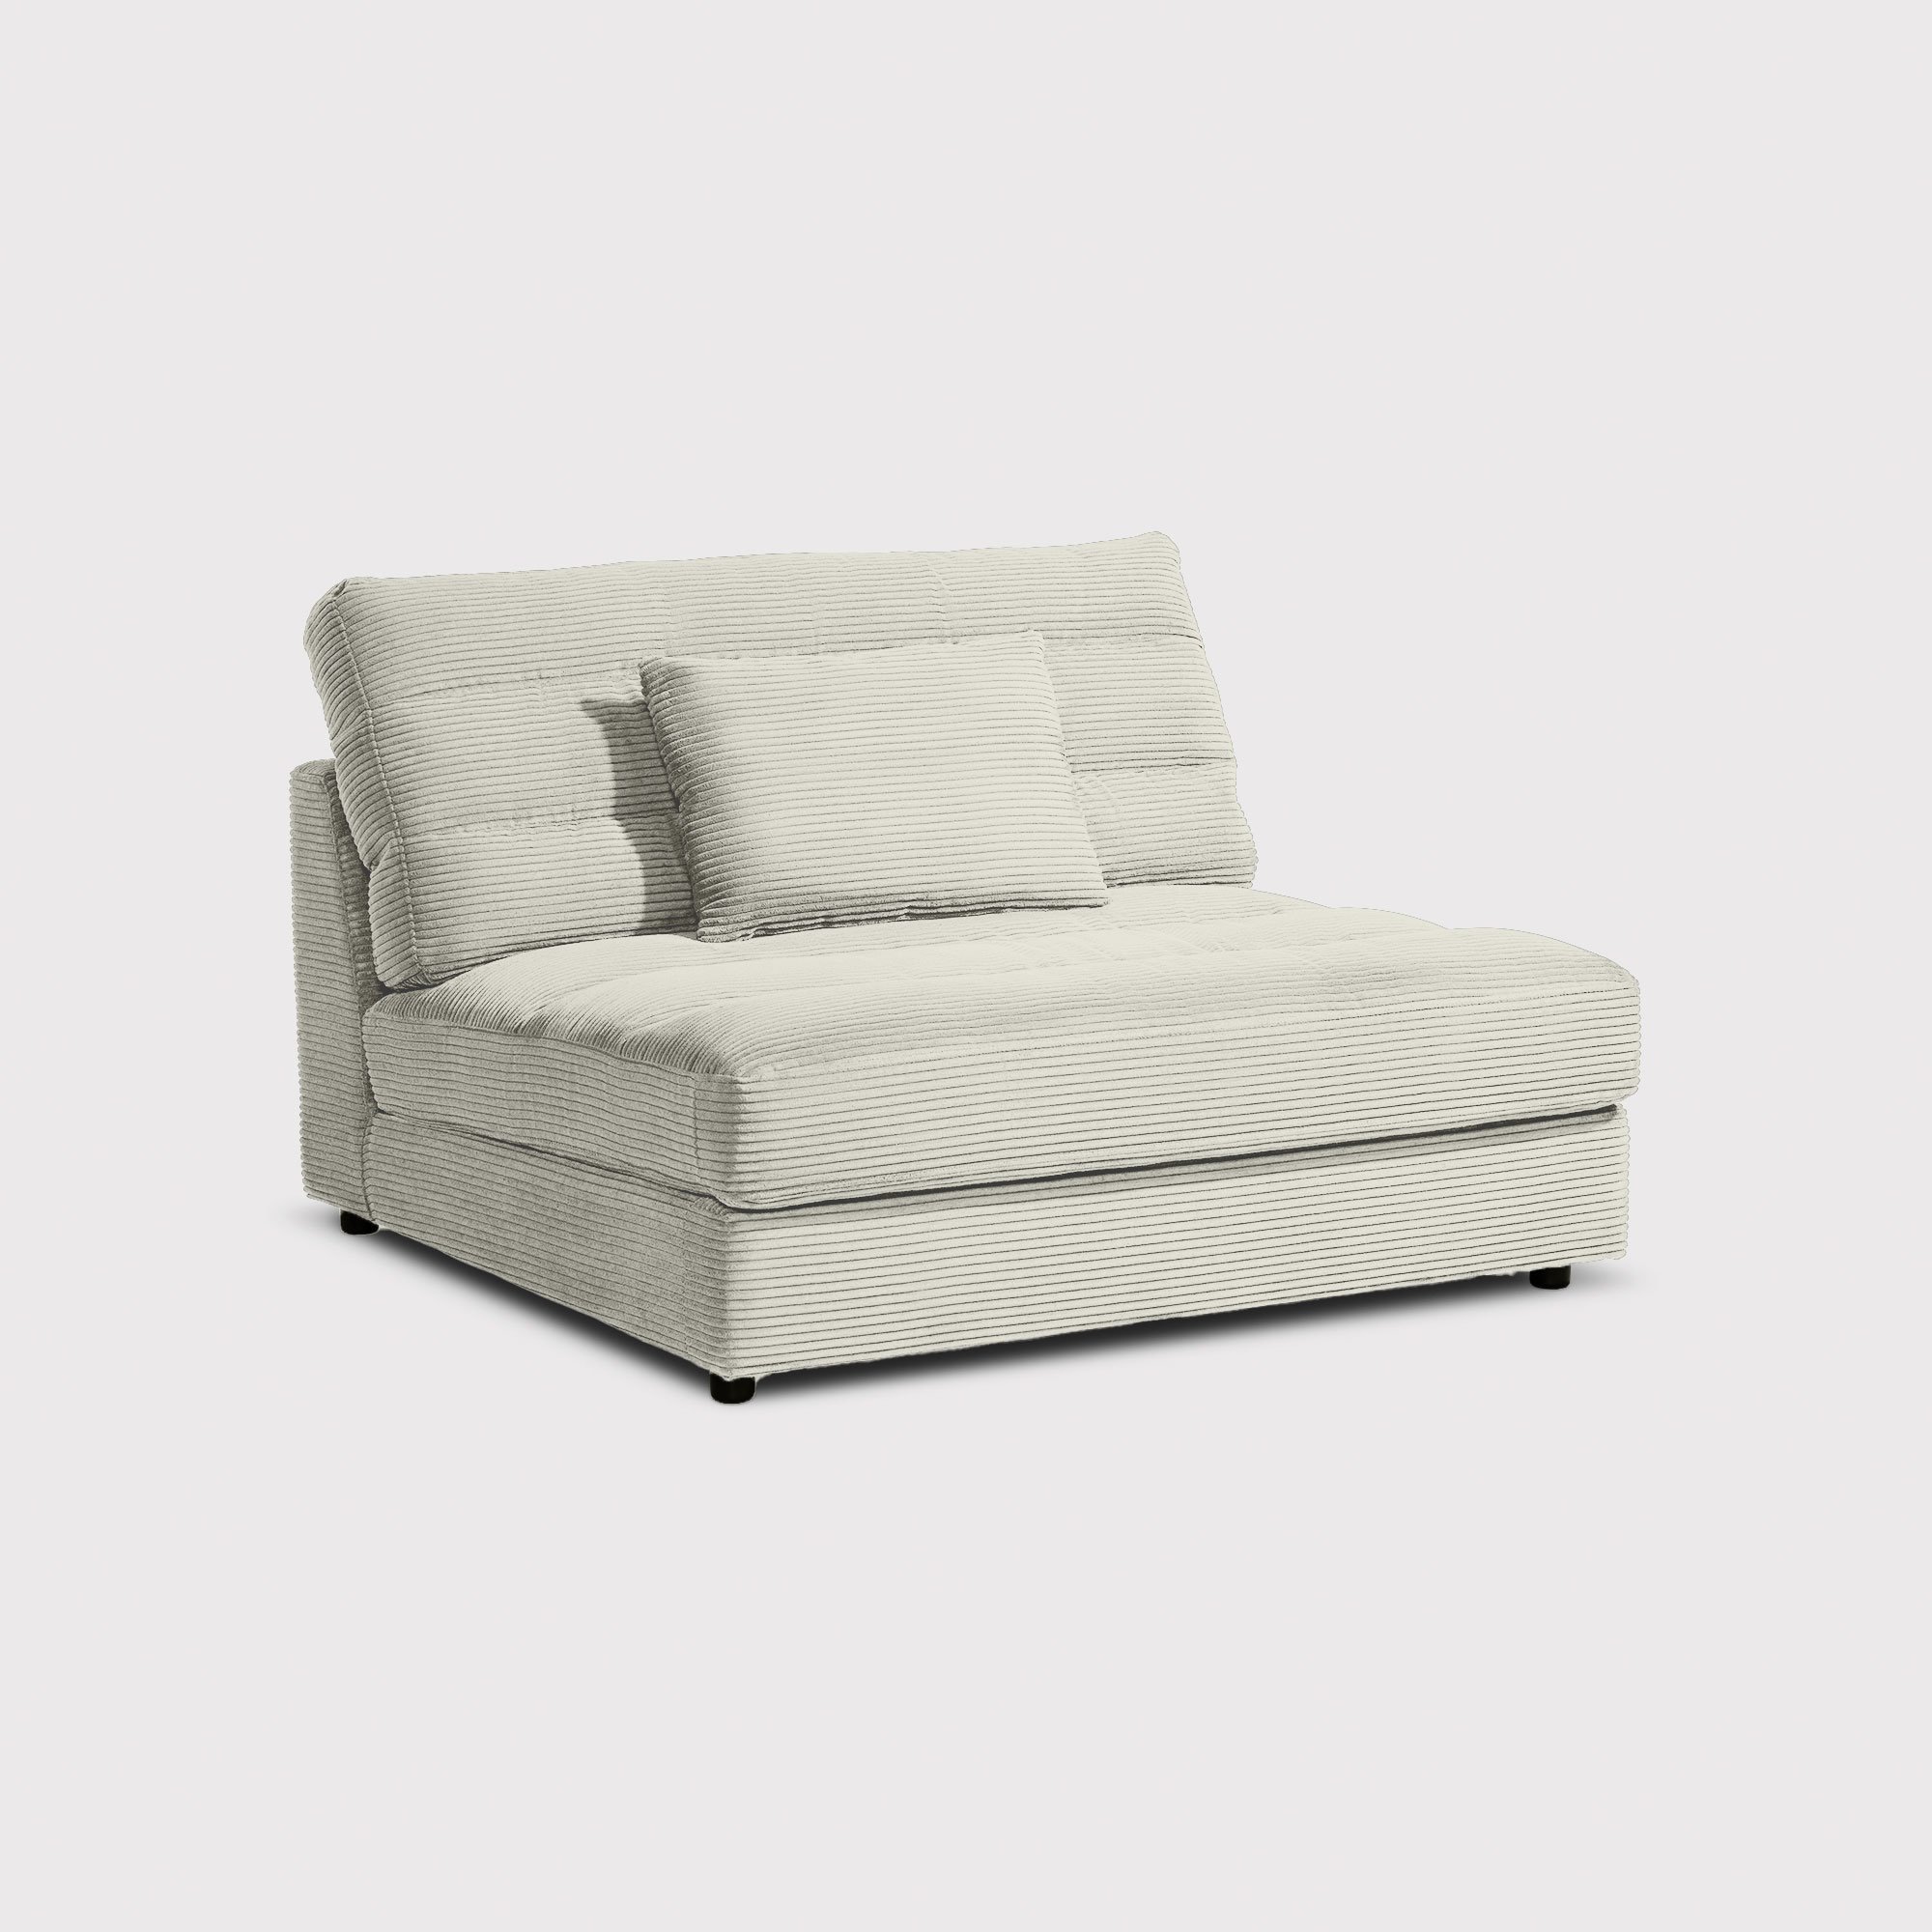 Twain 1.5 Seater Without Armrests, Grey Fabric | Barker & Stonehouse